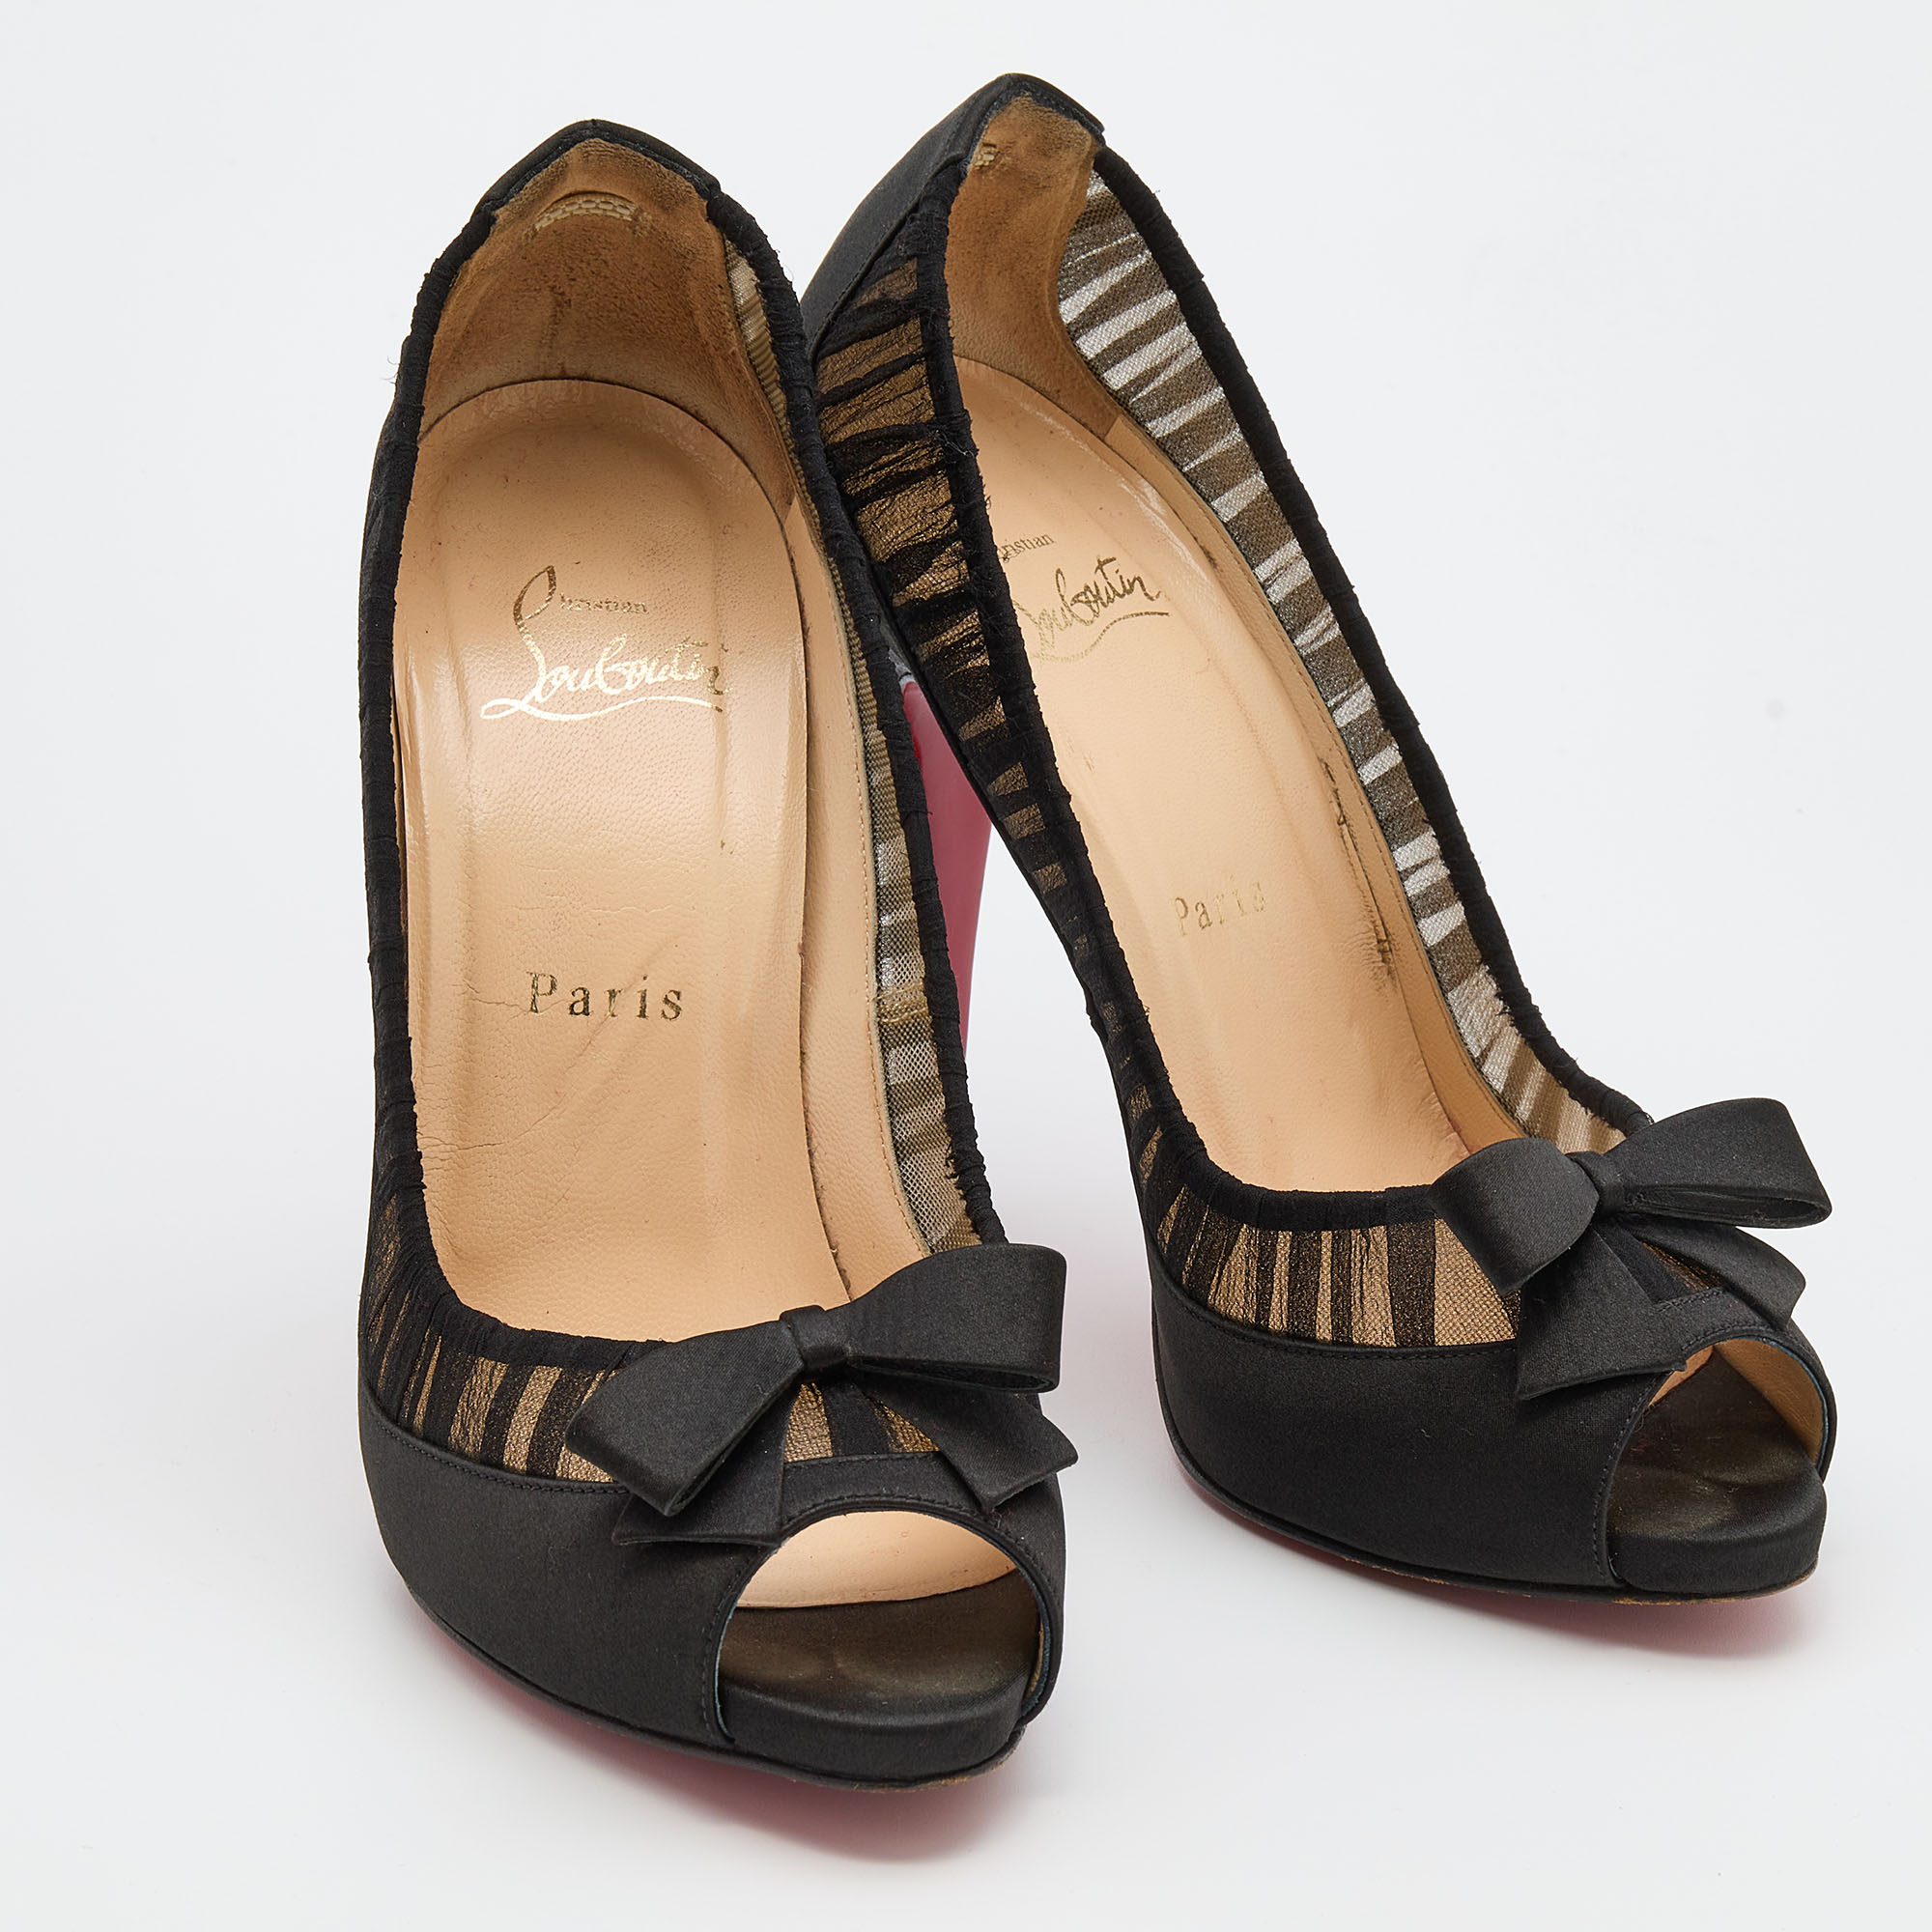 Christian Louboutin Black Satin And Fabric Angelique Bow Peep Toe Pumps Size 36.5